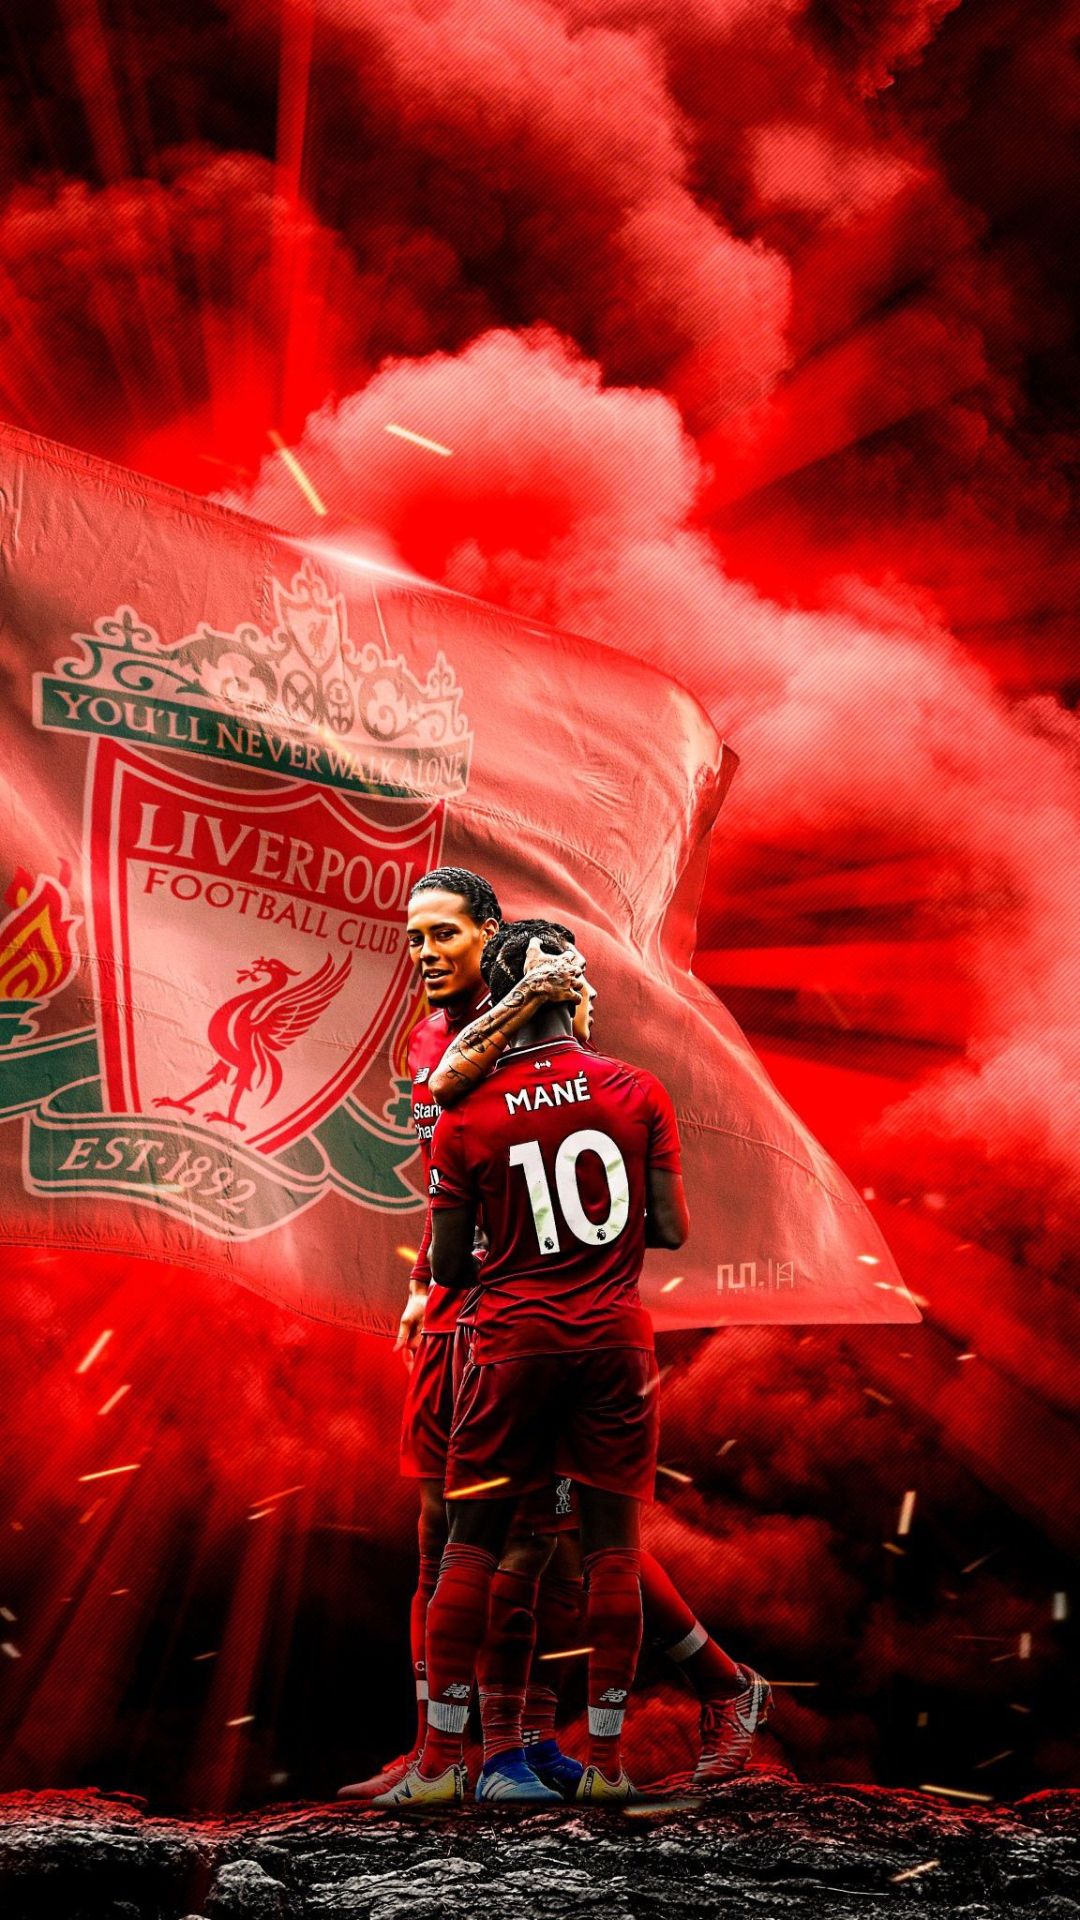 Liverpool Fc Background